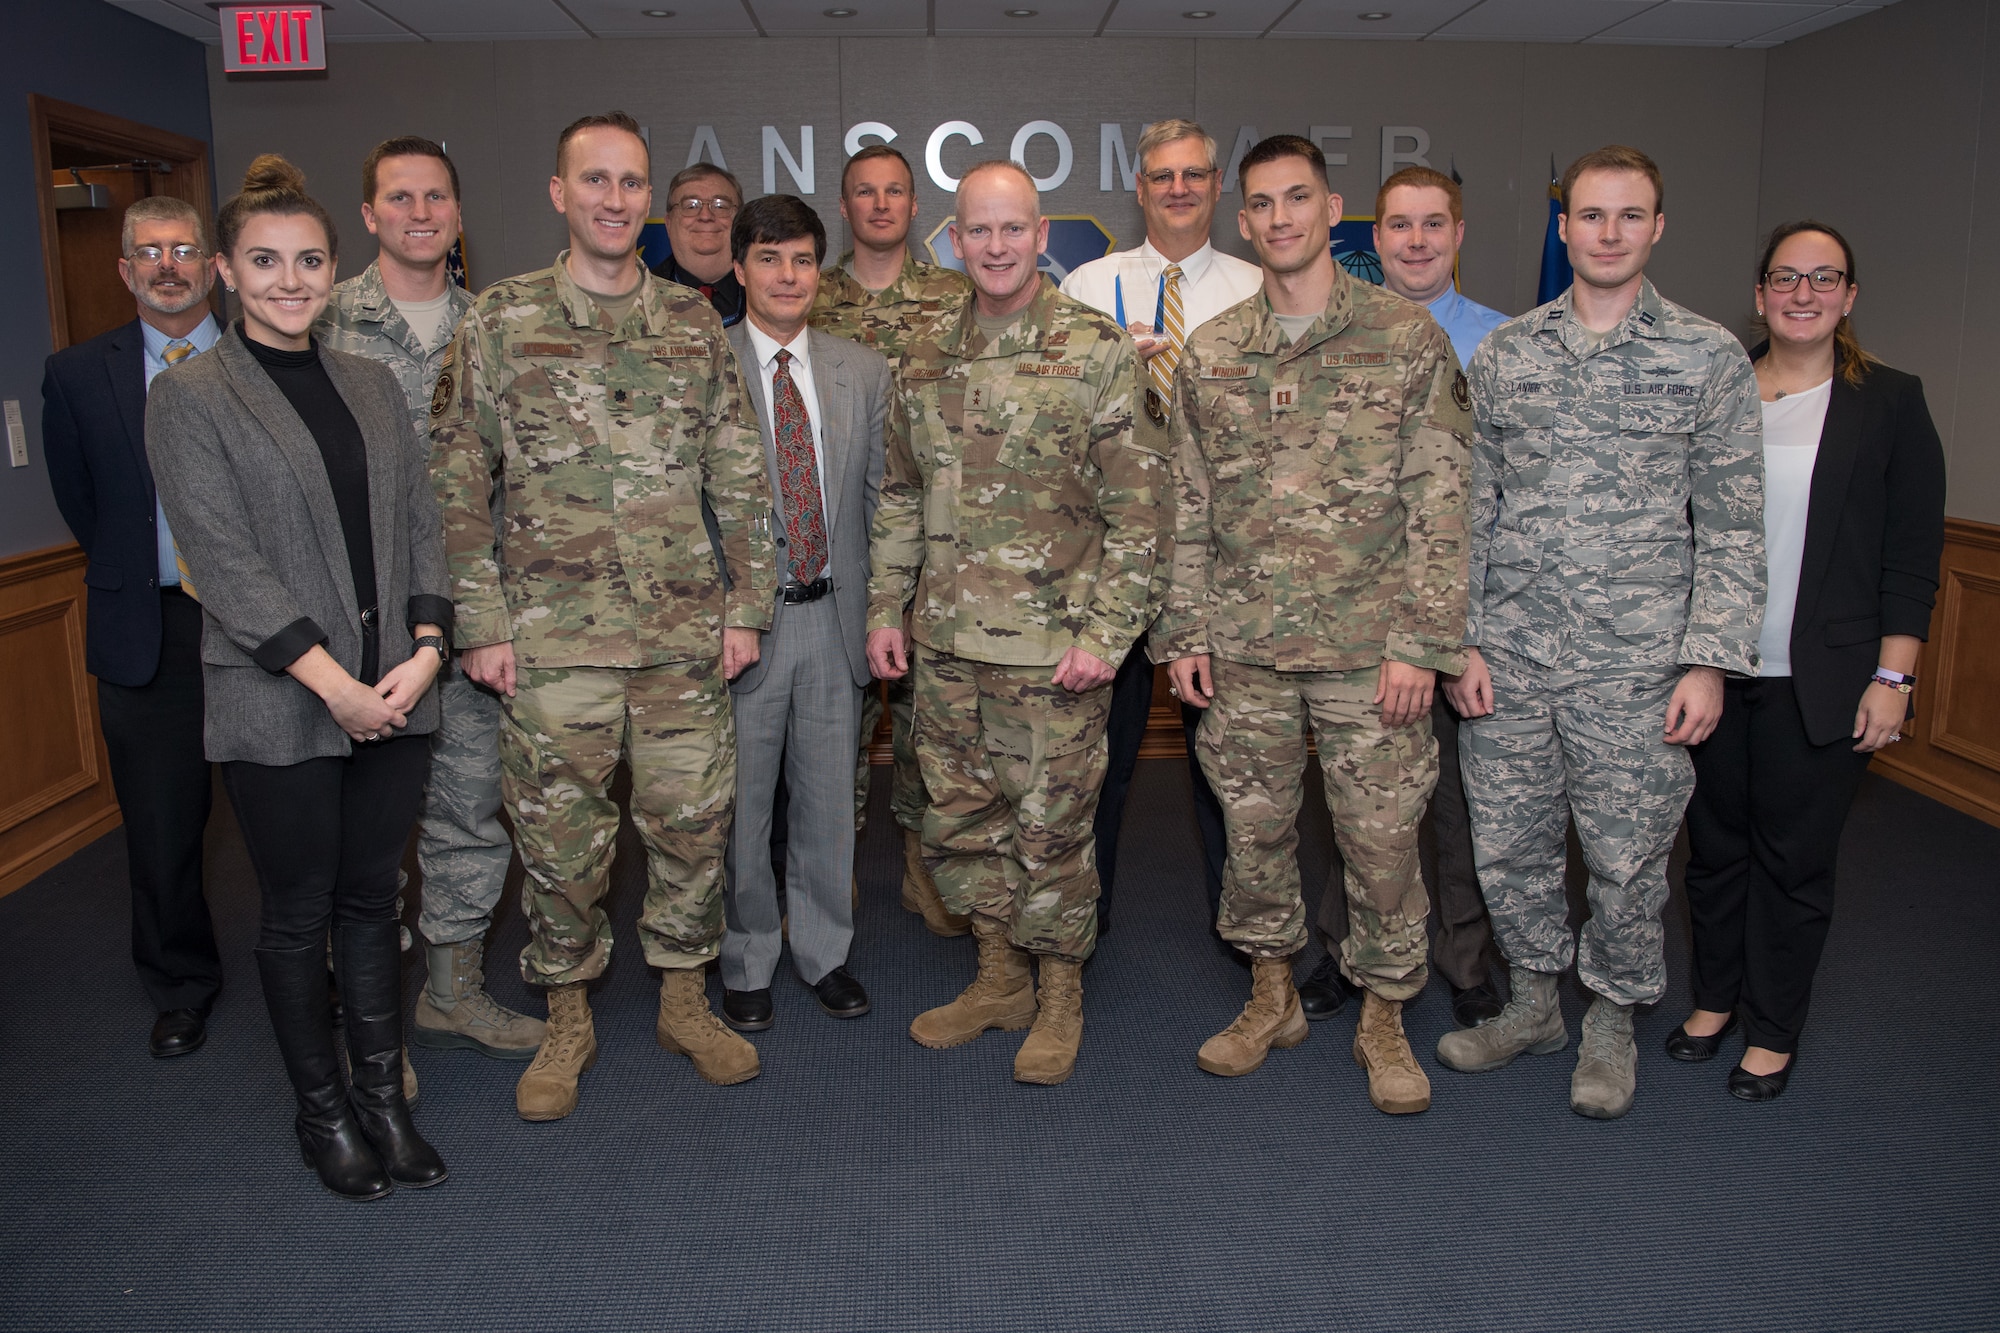 Maj. Gen. Michael Schmidt, program executive officer for Command, Control, Communications, Intelligence and Networks, poses for a picture with his directorate’s winners and nominees of the Air Force Life Cycle Management Center’s 2019 Acquisition Management Award’s after the ceremony, Hanscom Air Force Base, Mass., Nov. 14. All of Hanscom’s winners and nominees had won their categories at the local level before competing against their colleagues at this final level.